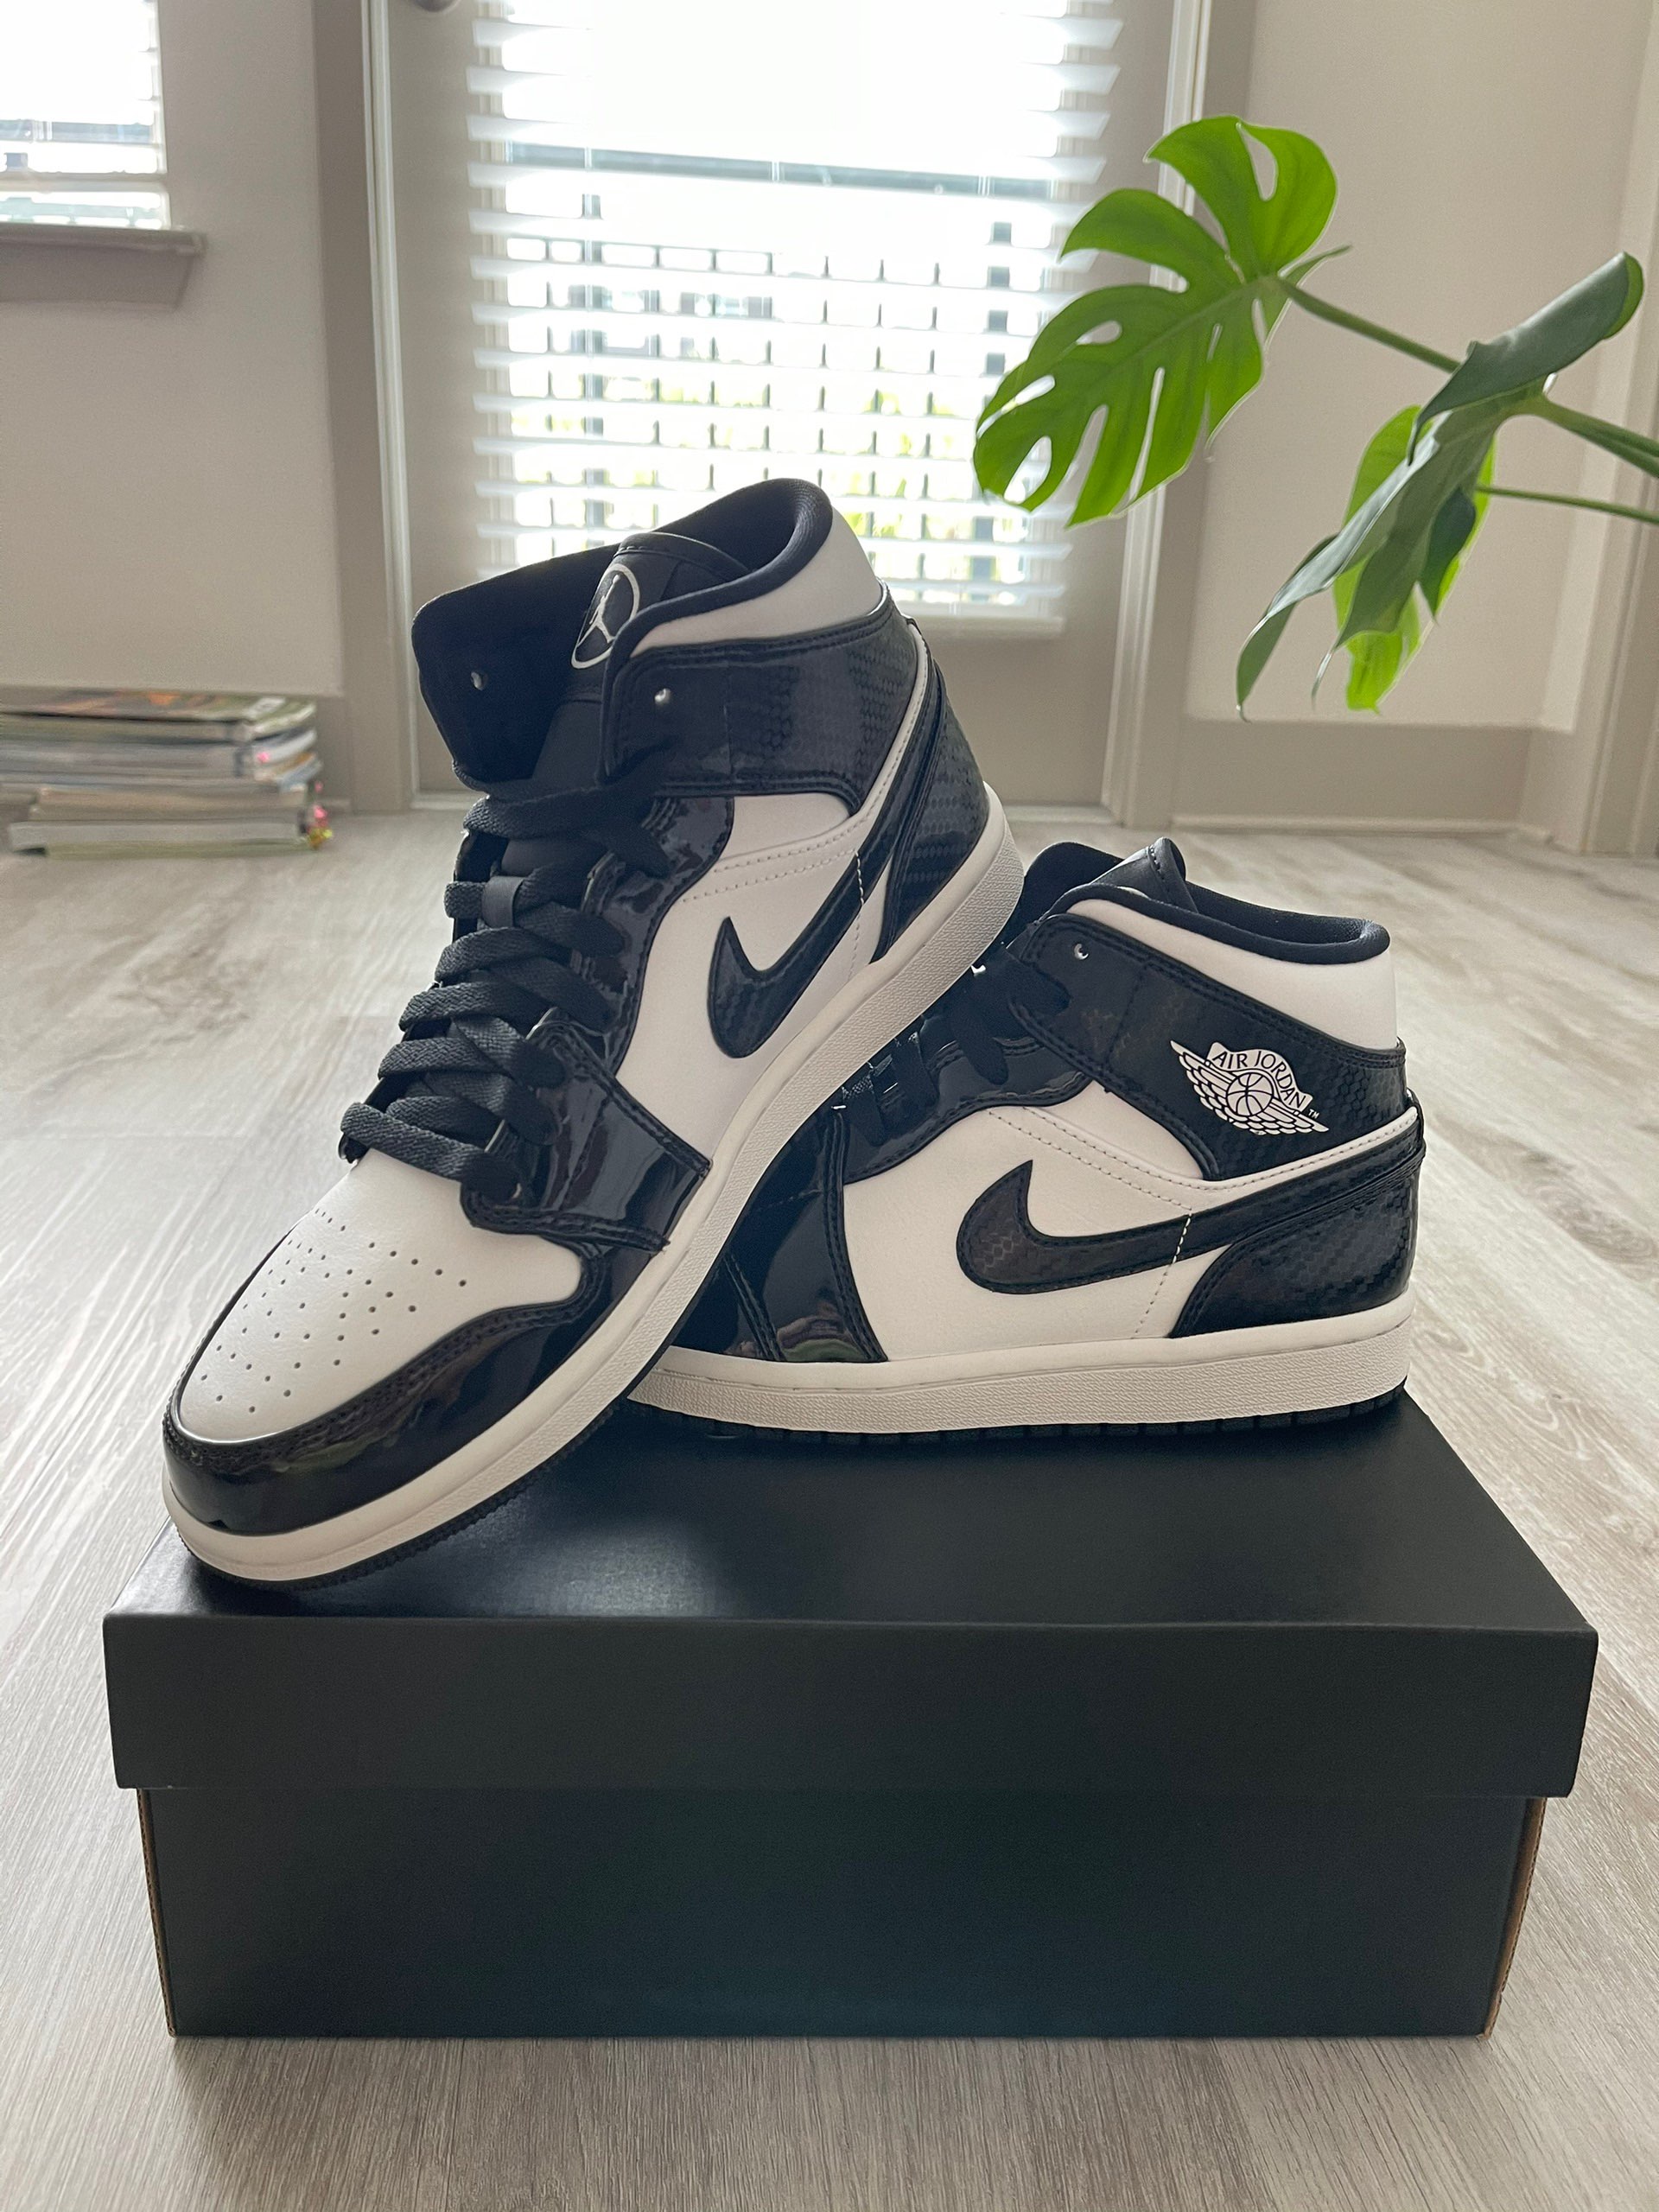 Air Jordan 1 Mid ‘All-Star’ Black/White For Sale – The Sole Line